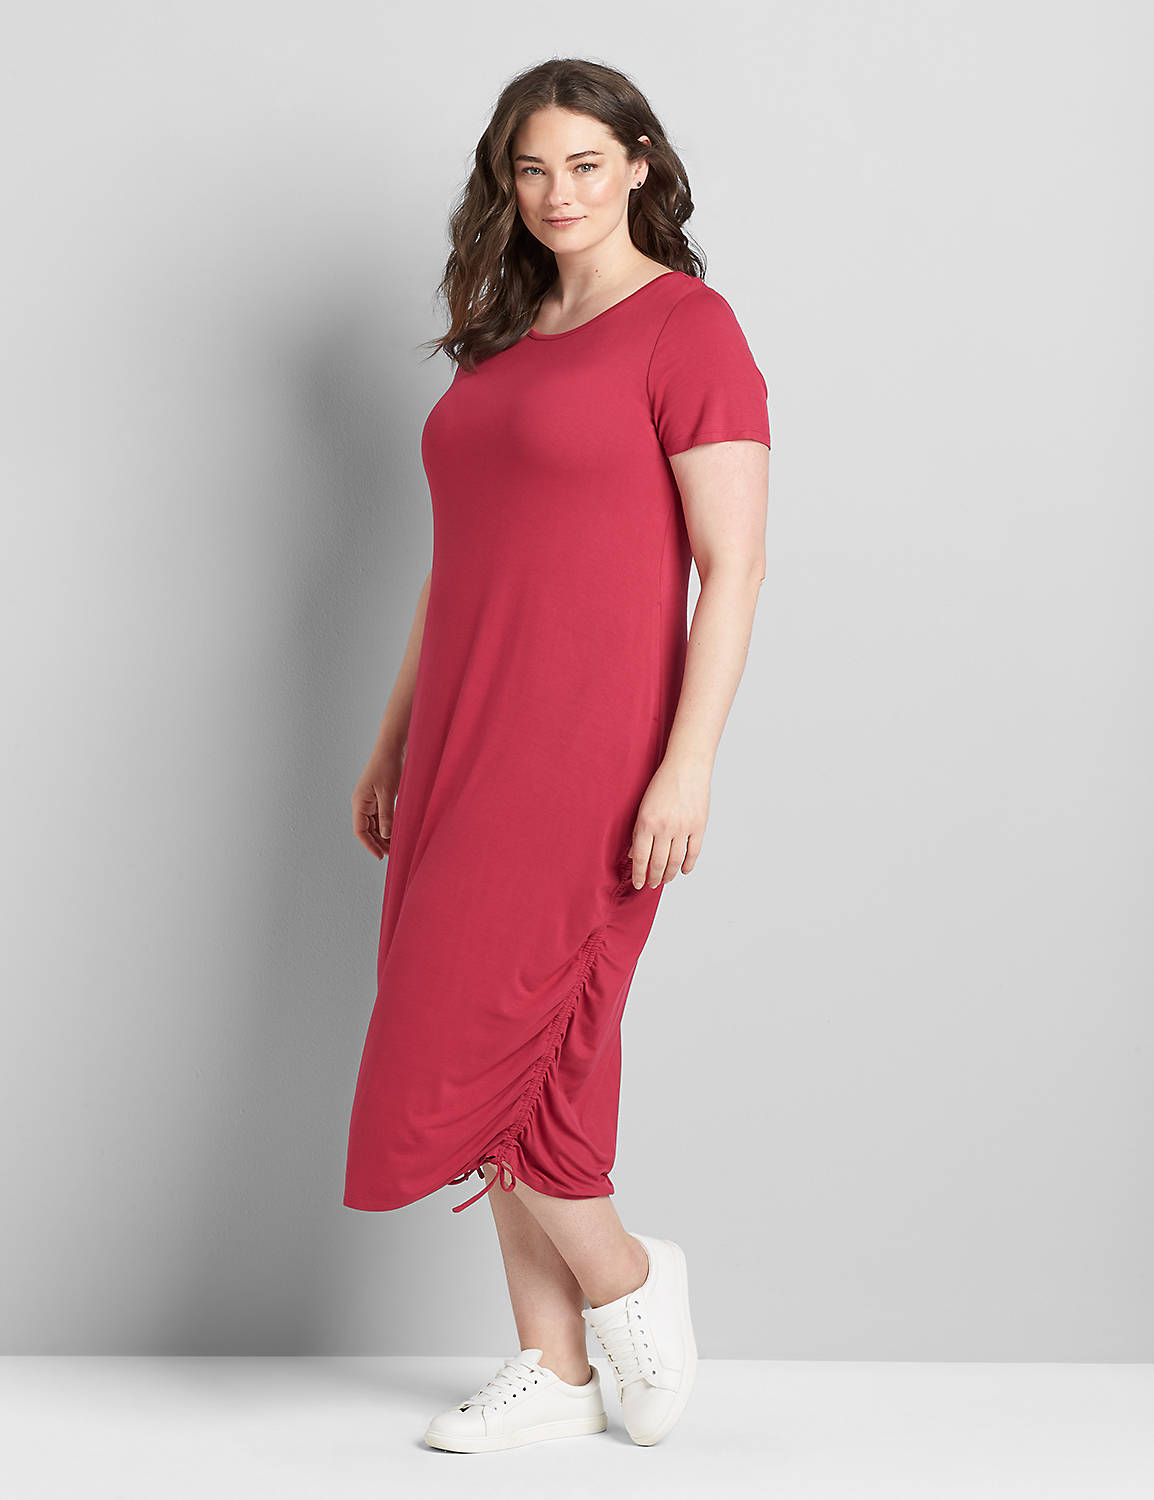 Ruched Side Midi Dress Product Image 1